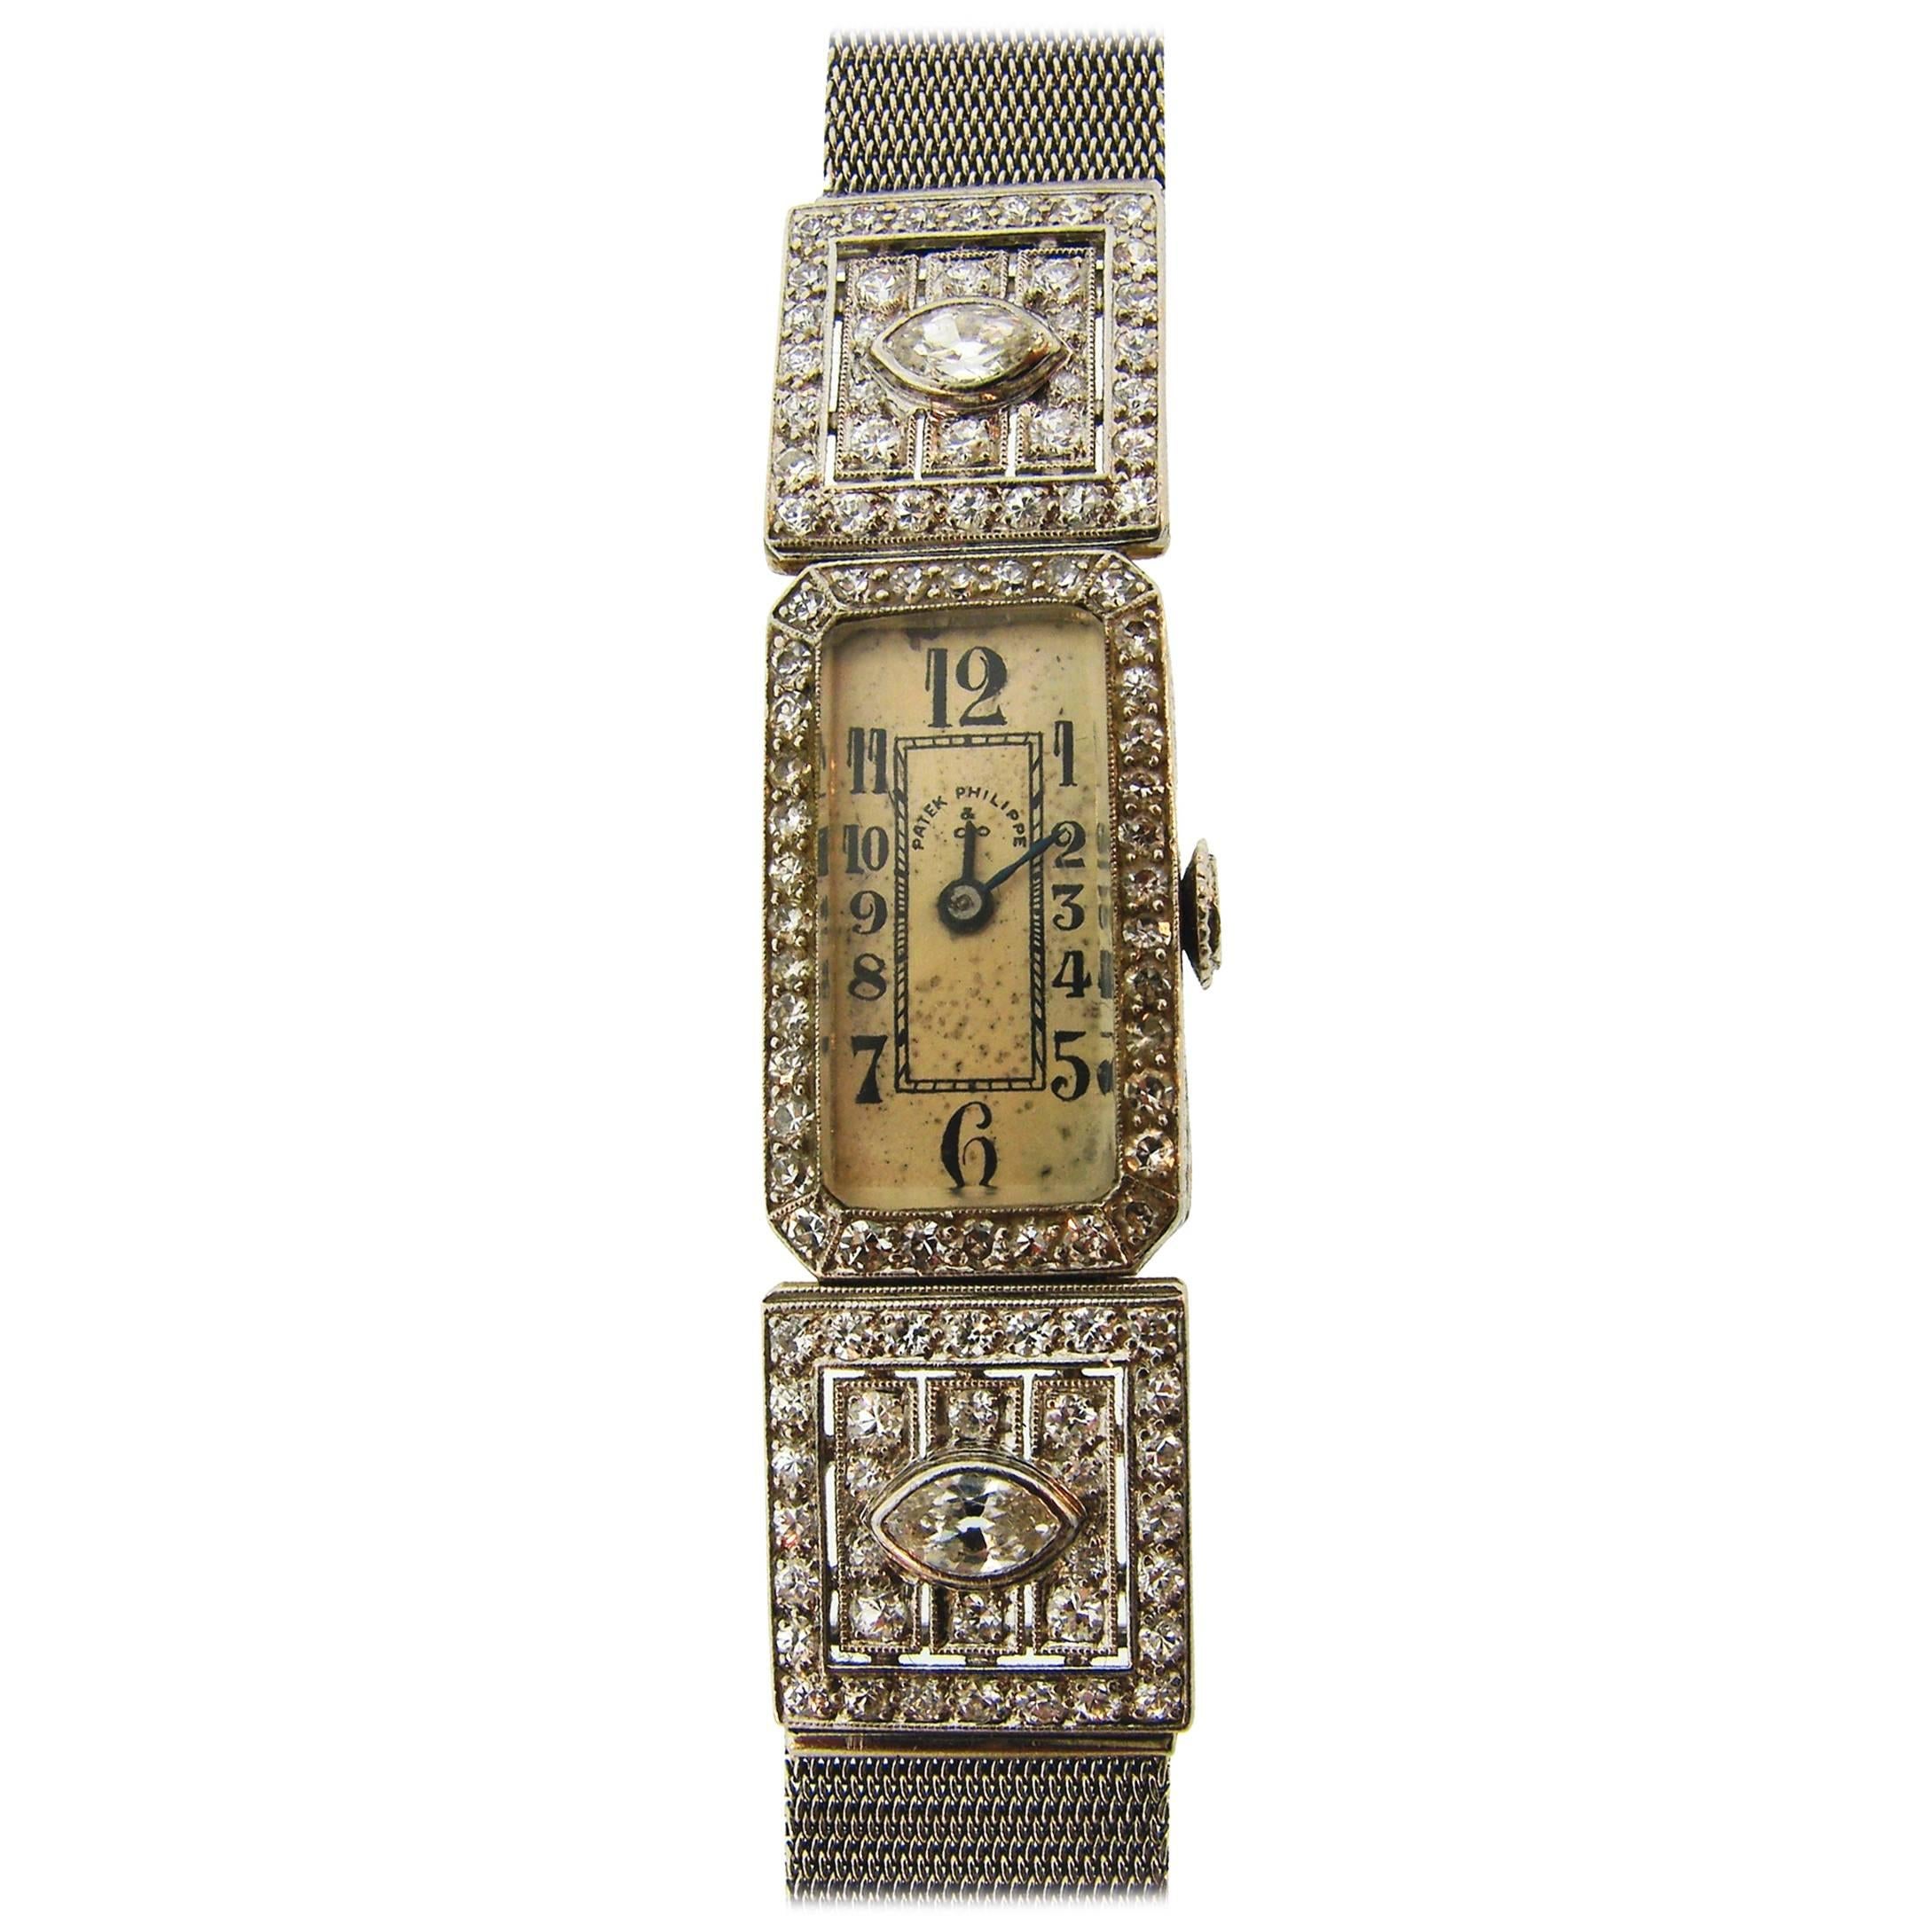 Elegant and timeless jeweled Art Deco lady's watch created by Patek Philippe in the 1930's. Delicate, feminine and wearable, it is a great addition to your jewelry collection. 
The watch is made of platinum (tested) and encrusted with marquise cut